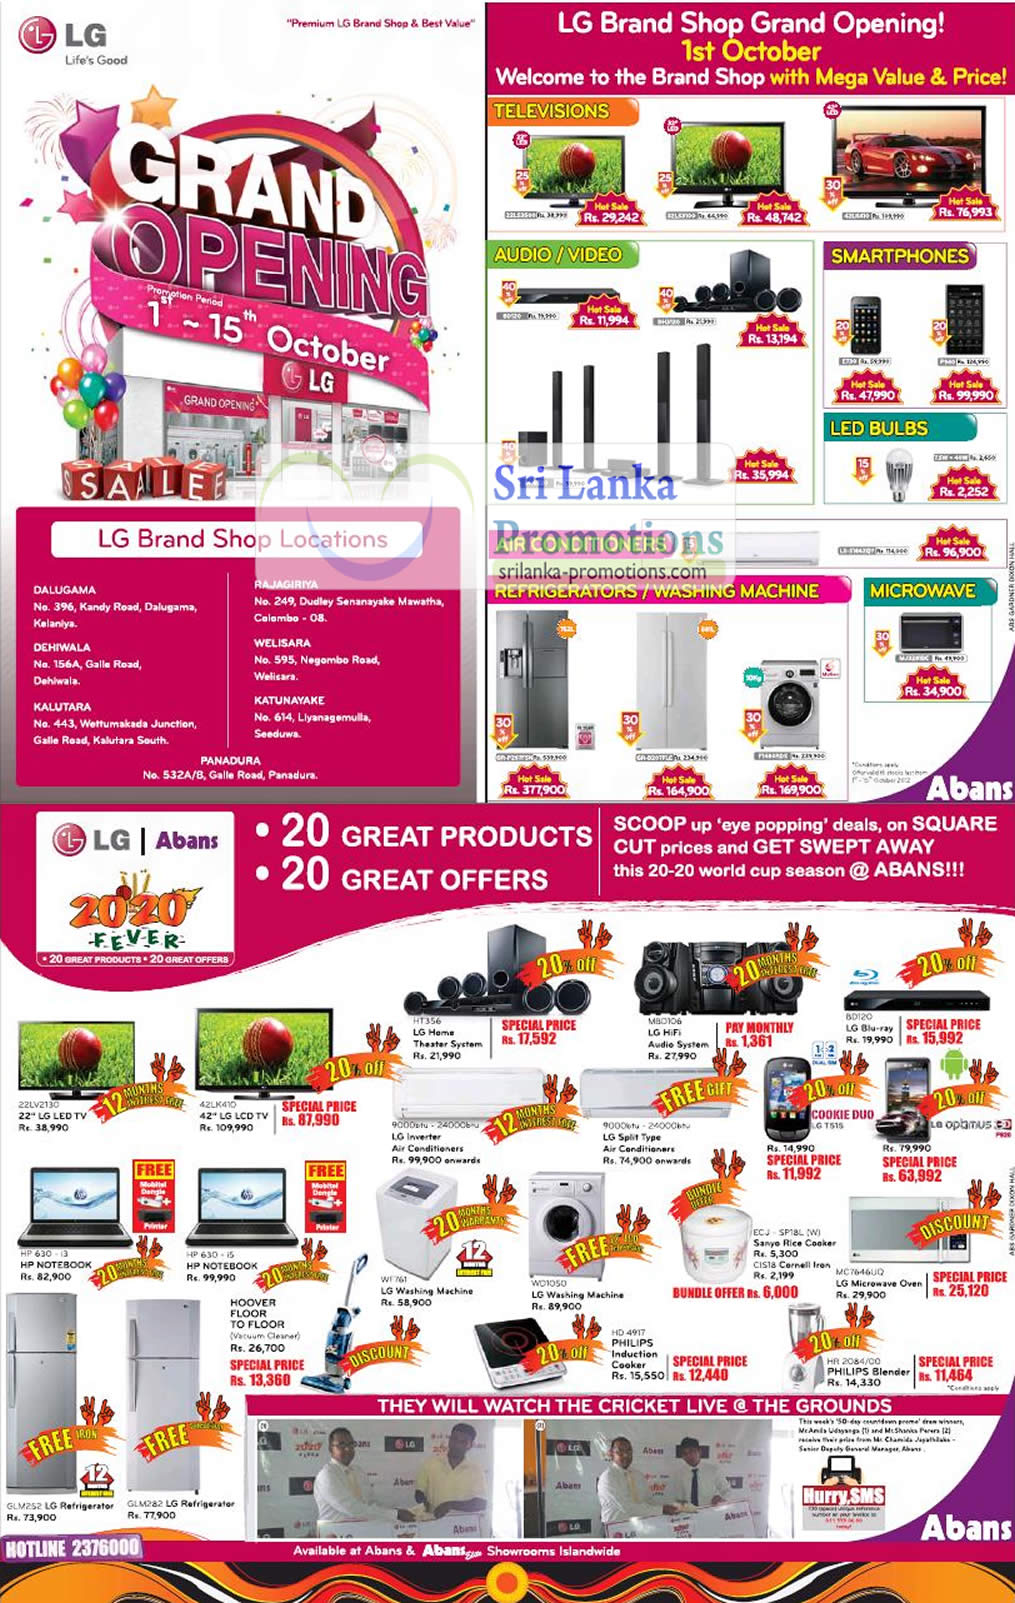 Featured image for LG Brand Shop Grand Opening Sale 1 - 15 Oct 2012